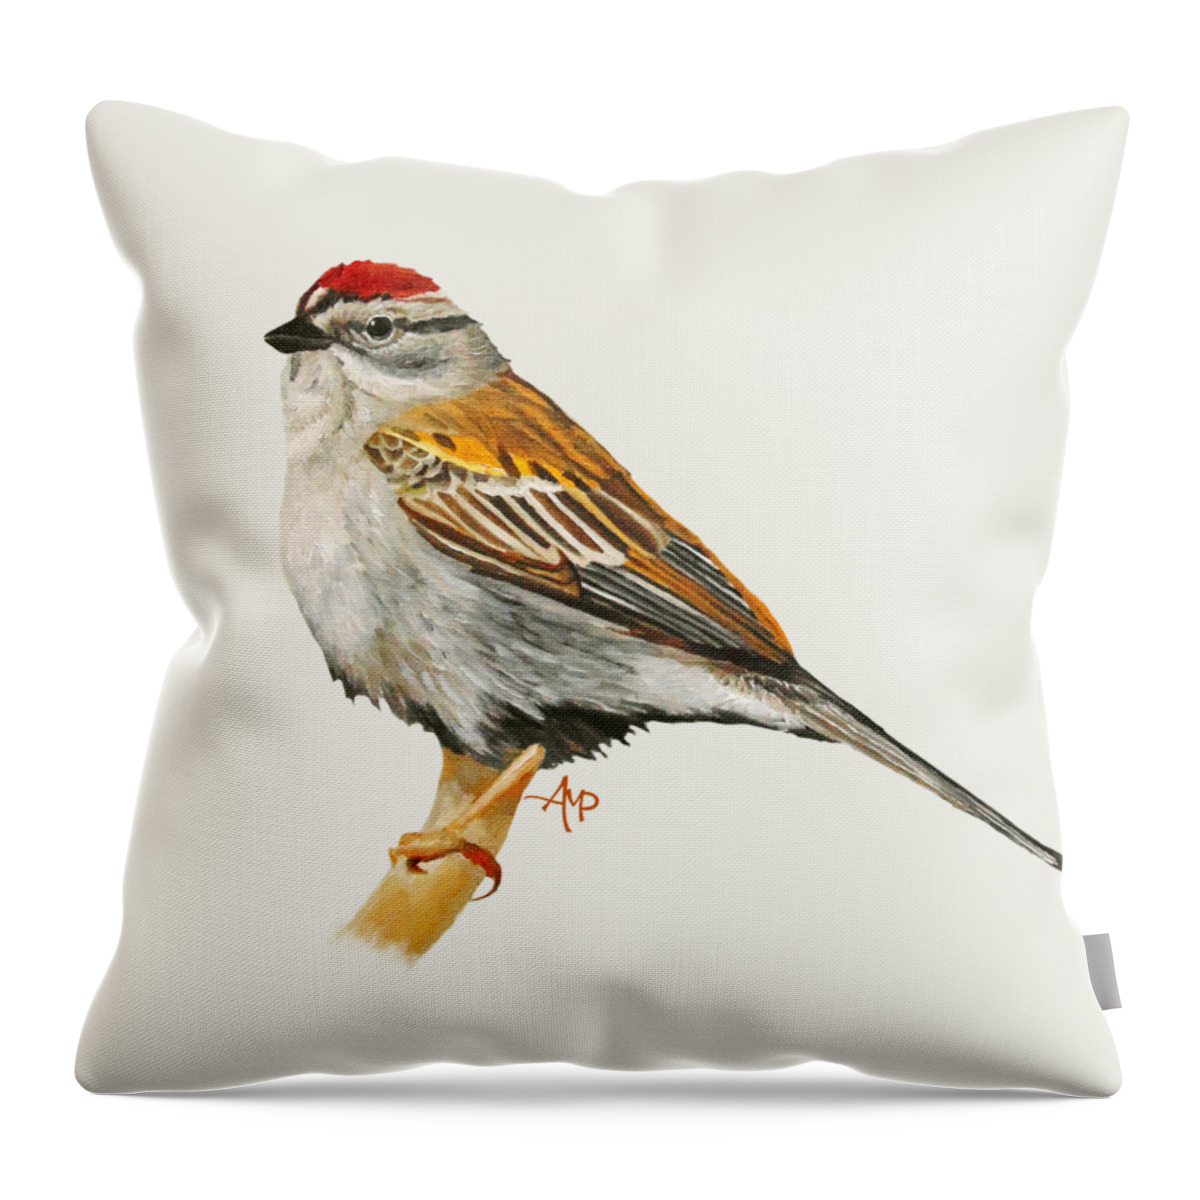 Chipping Sparrow Throw Pillow featuring the painting Chipping Sparrow #1 by Angeles M Pomata